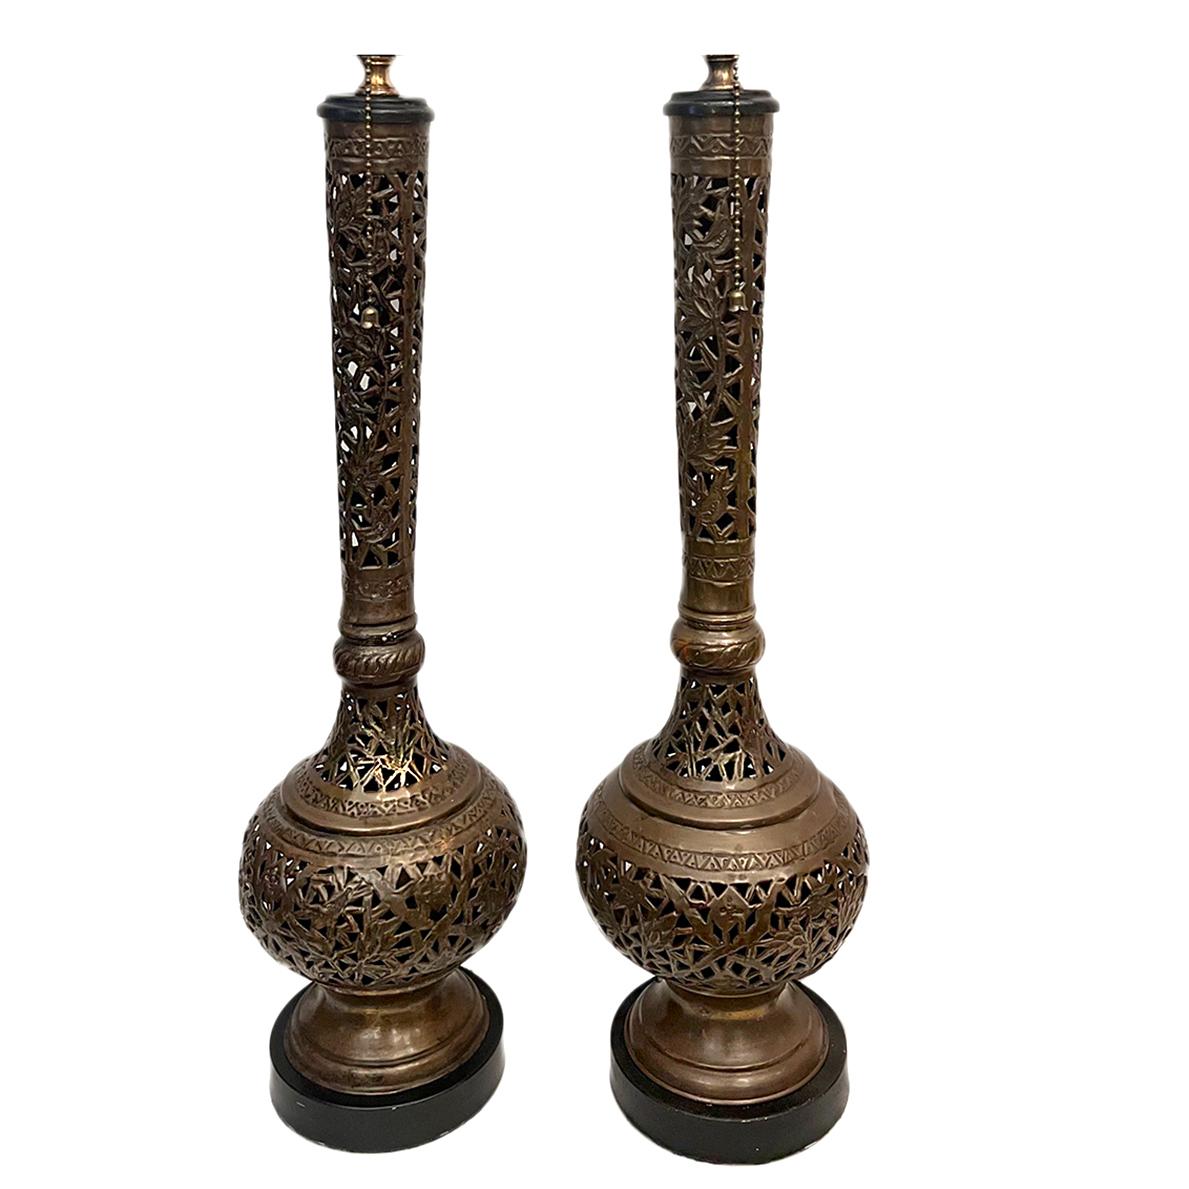 Pair of circa 1950's Moroccan pierced brass foliage lamps.

Measurements:
Height of body: 21.5